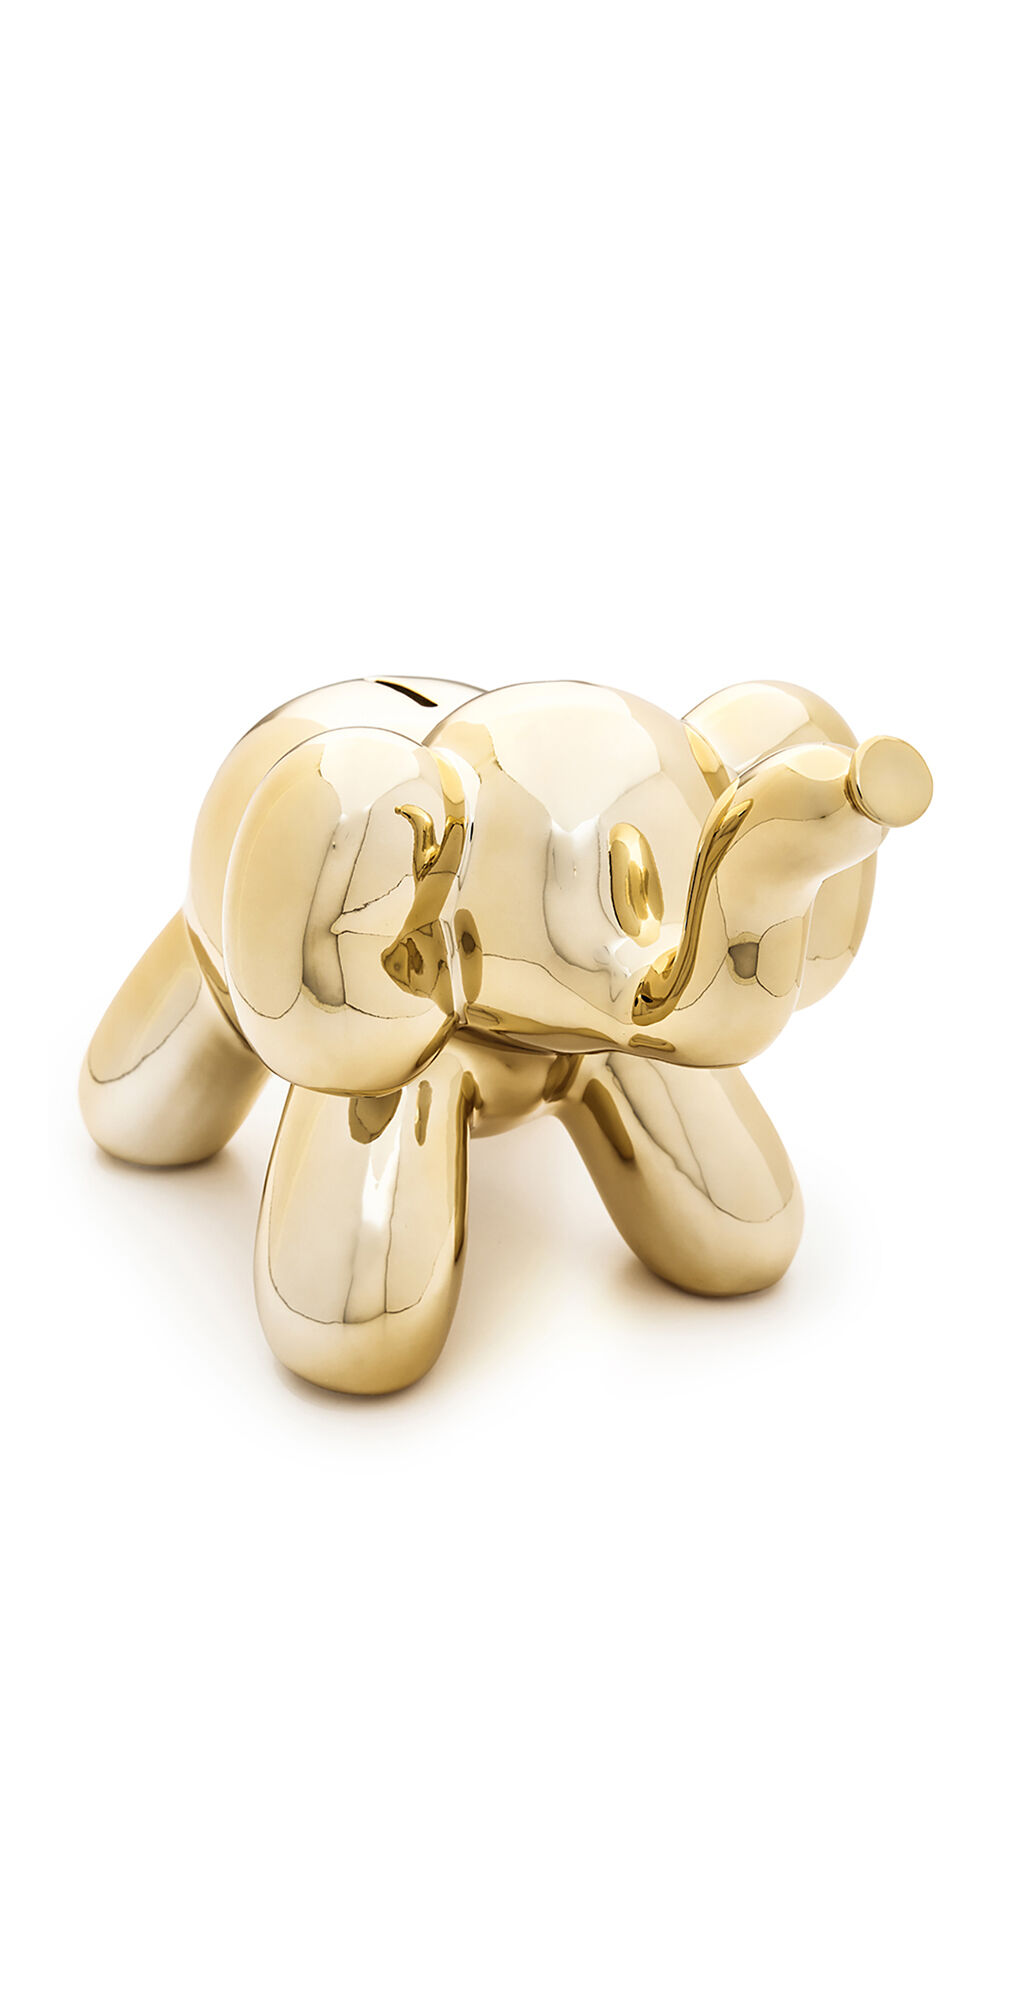 Shopbop Home Shopbop @Home Balloon Money Bank Elephant Gold One Size  Gold  size:One Size